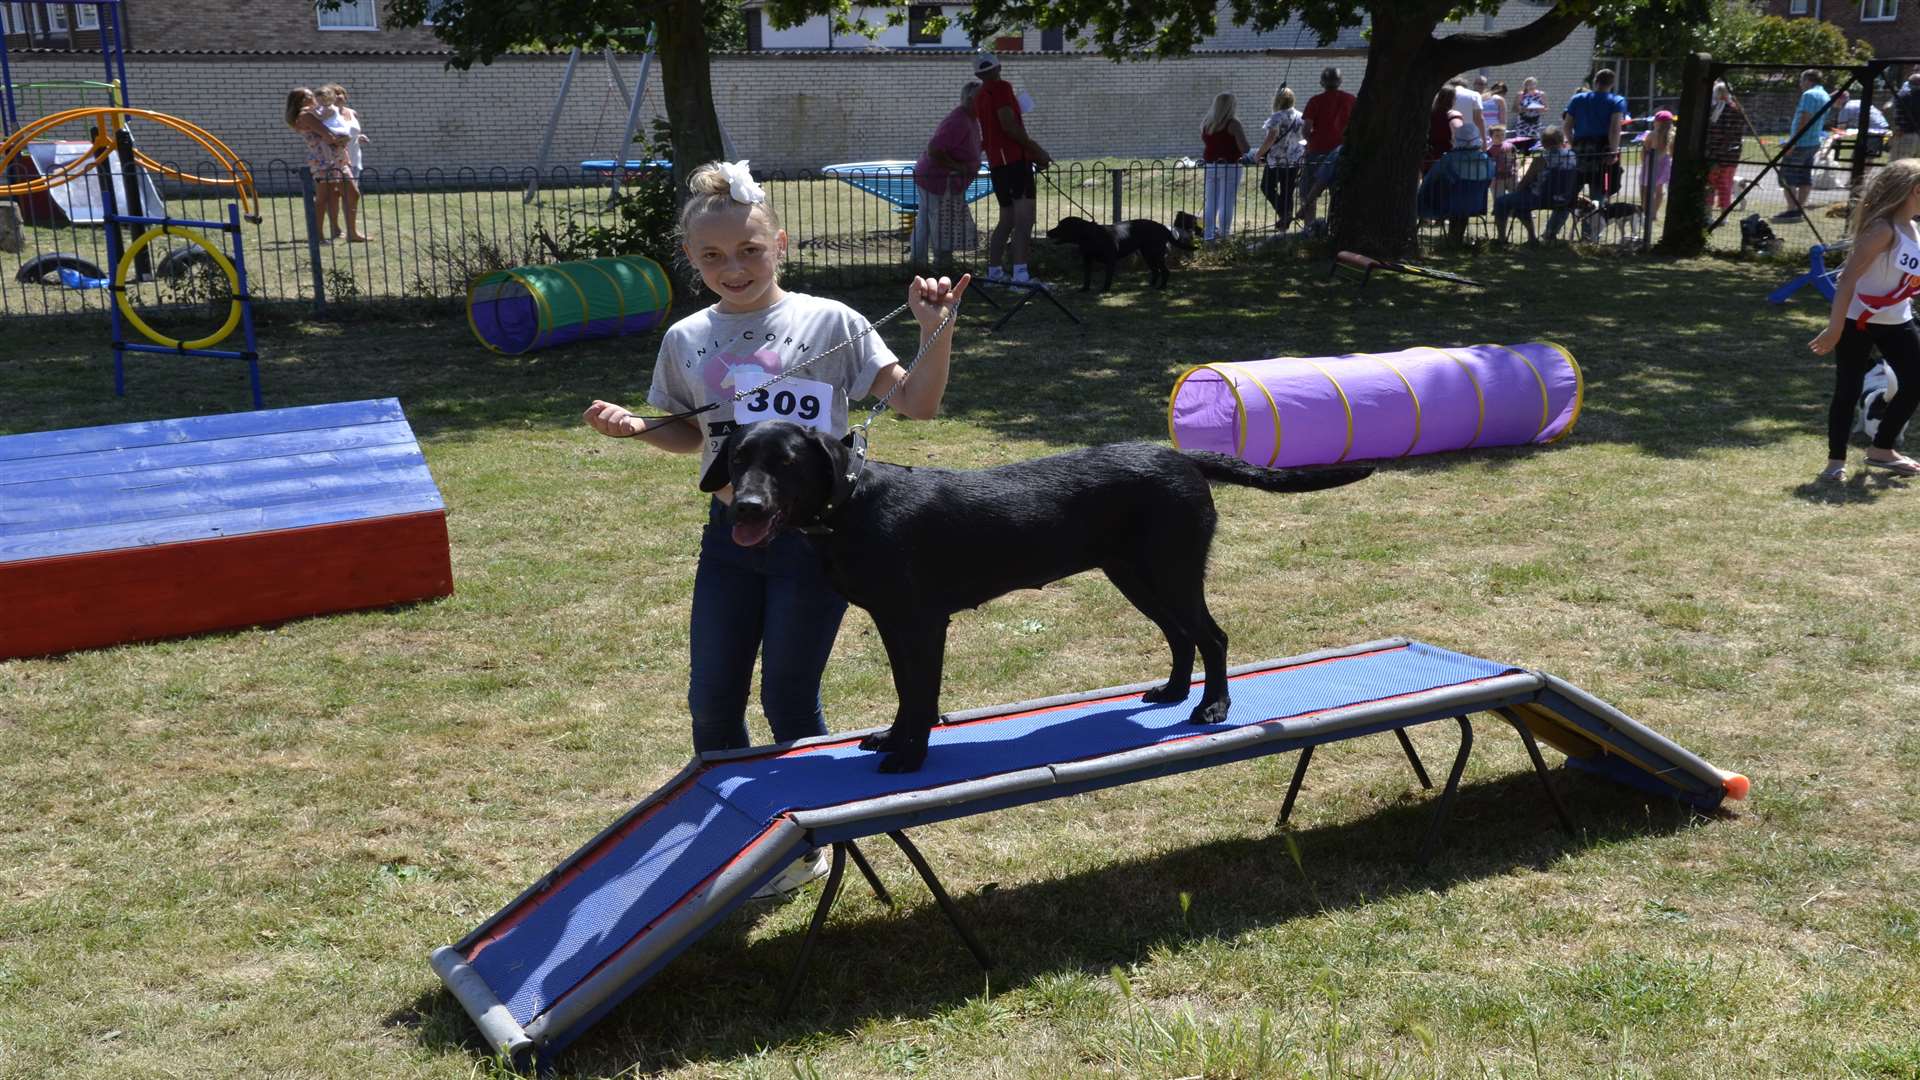 Cherry Richardson, 11, with her dog, Ellie, on one of the agility course props